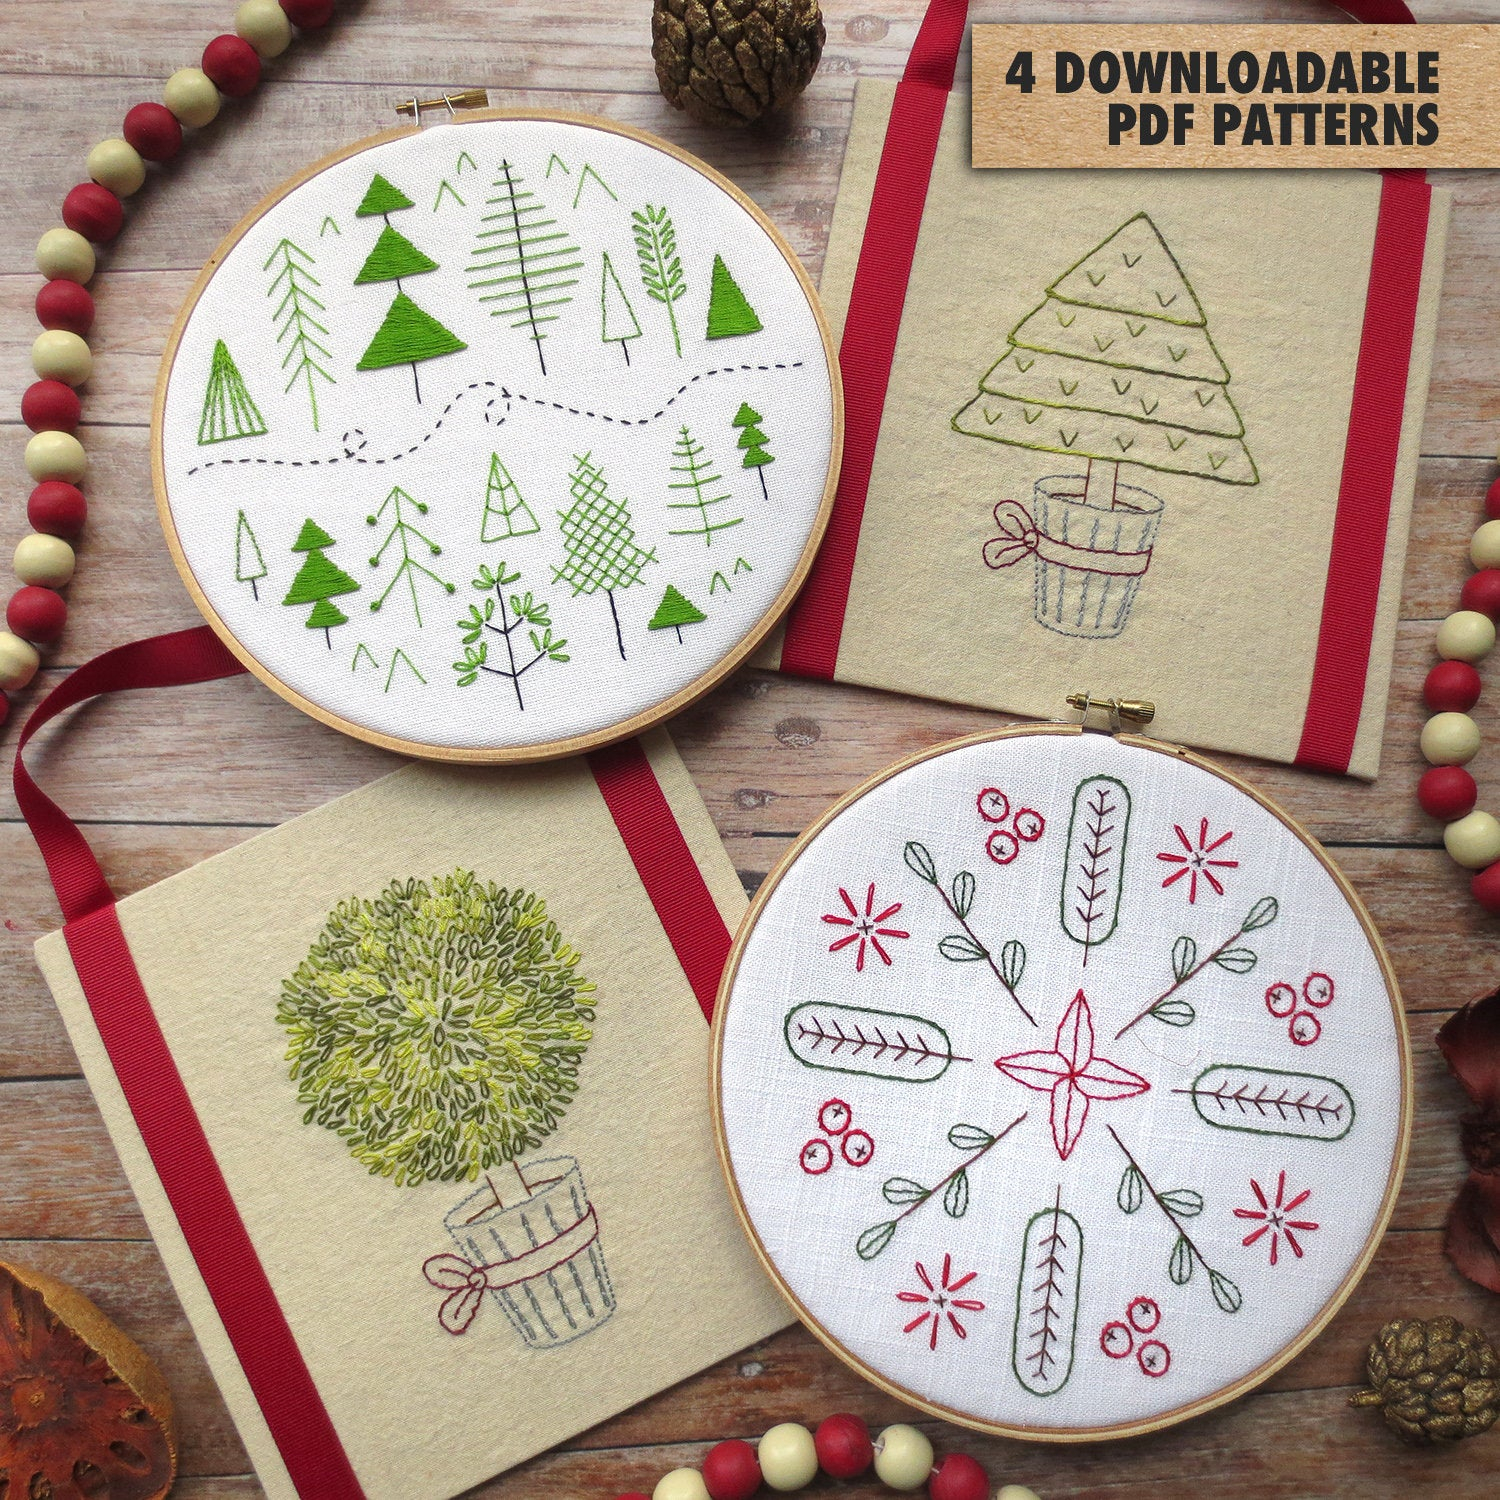 Hand Embroidery Christmas Patterns 4 Hand Embroidery Patterns Christmas Holiday Embroidery Etsy